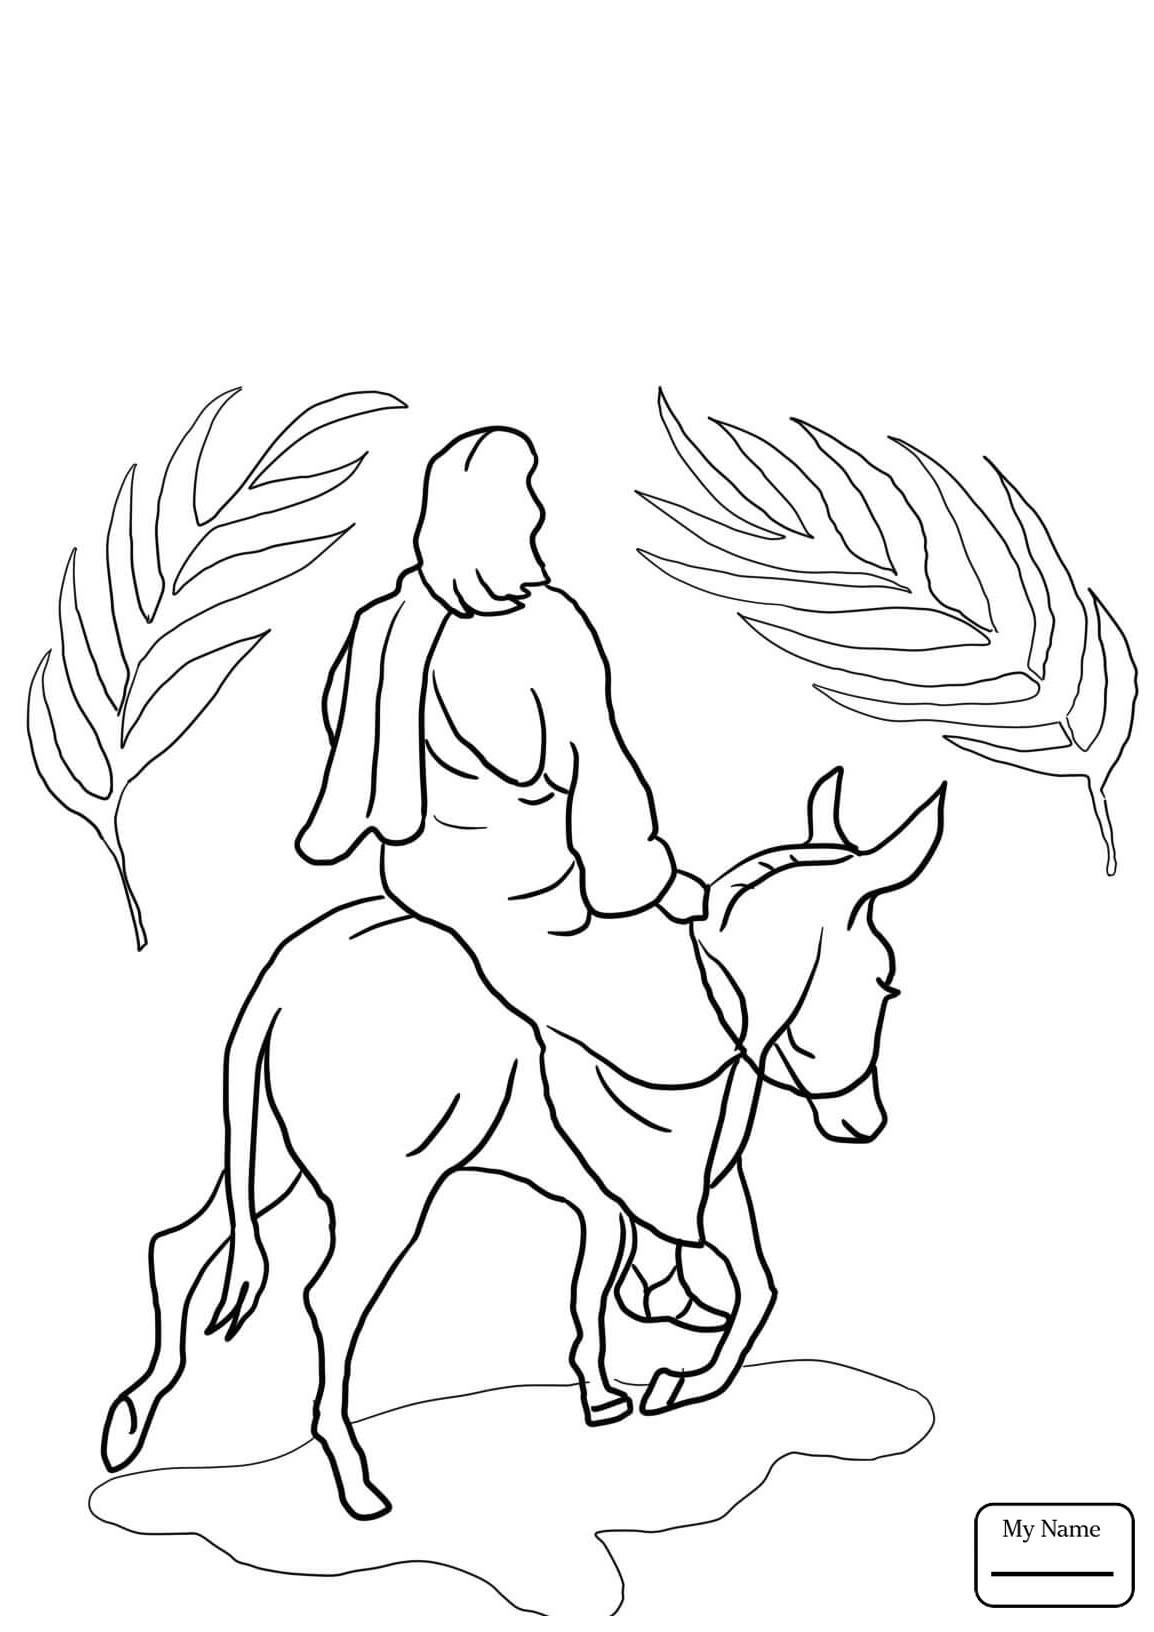 Palm Sunday Coloring Pages For Preschoolers at GetColorings.com | Free